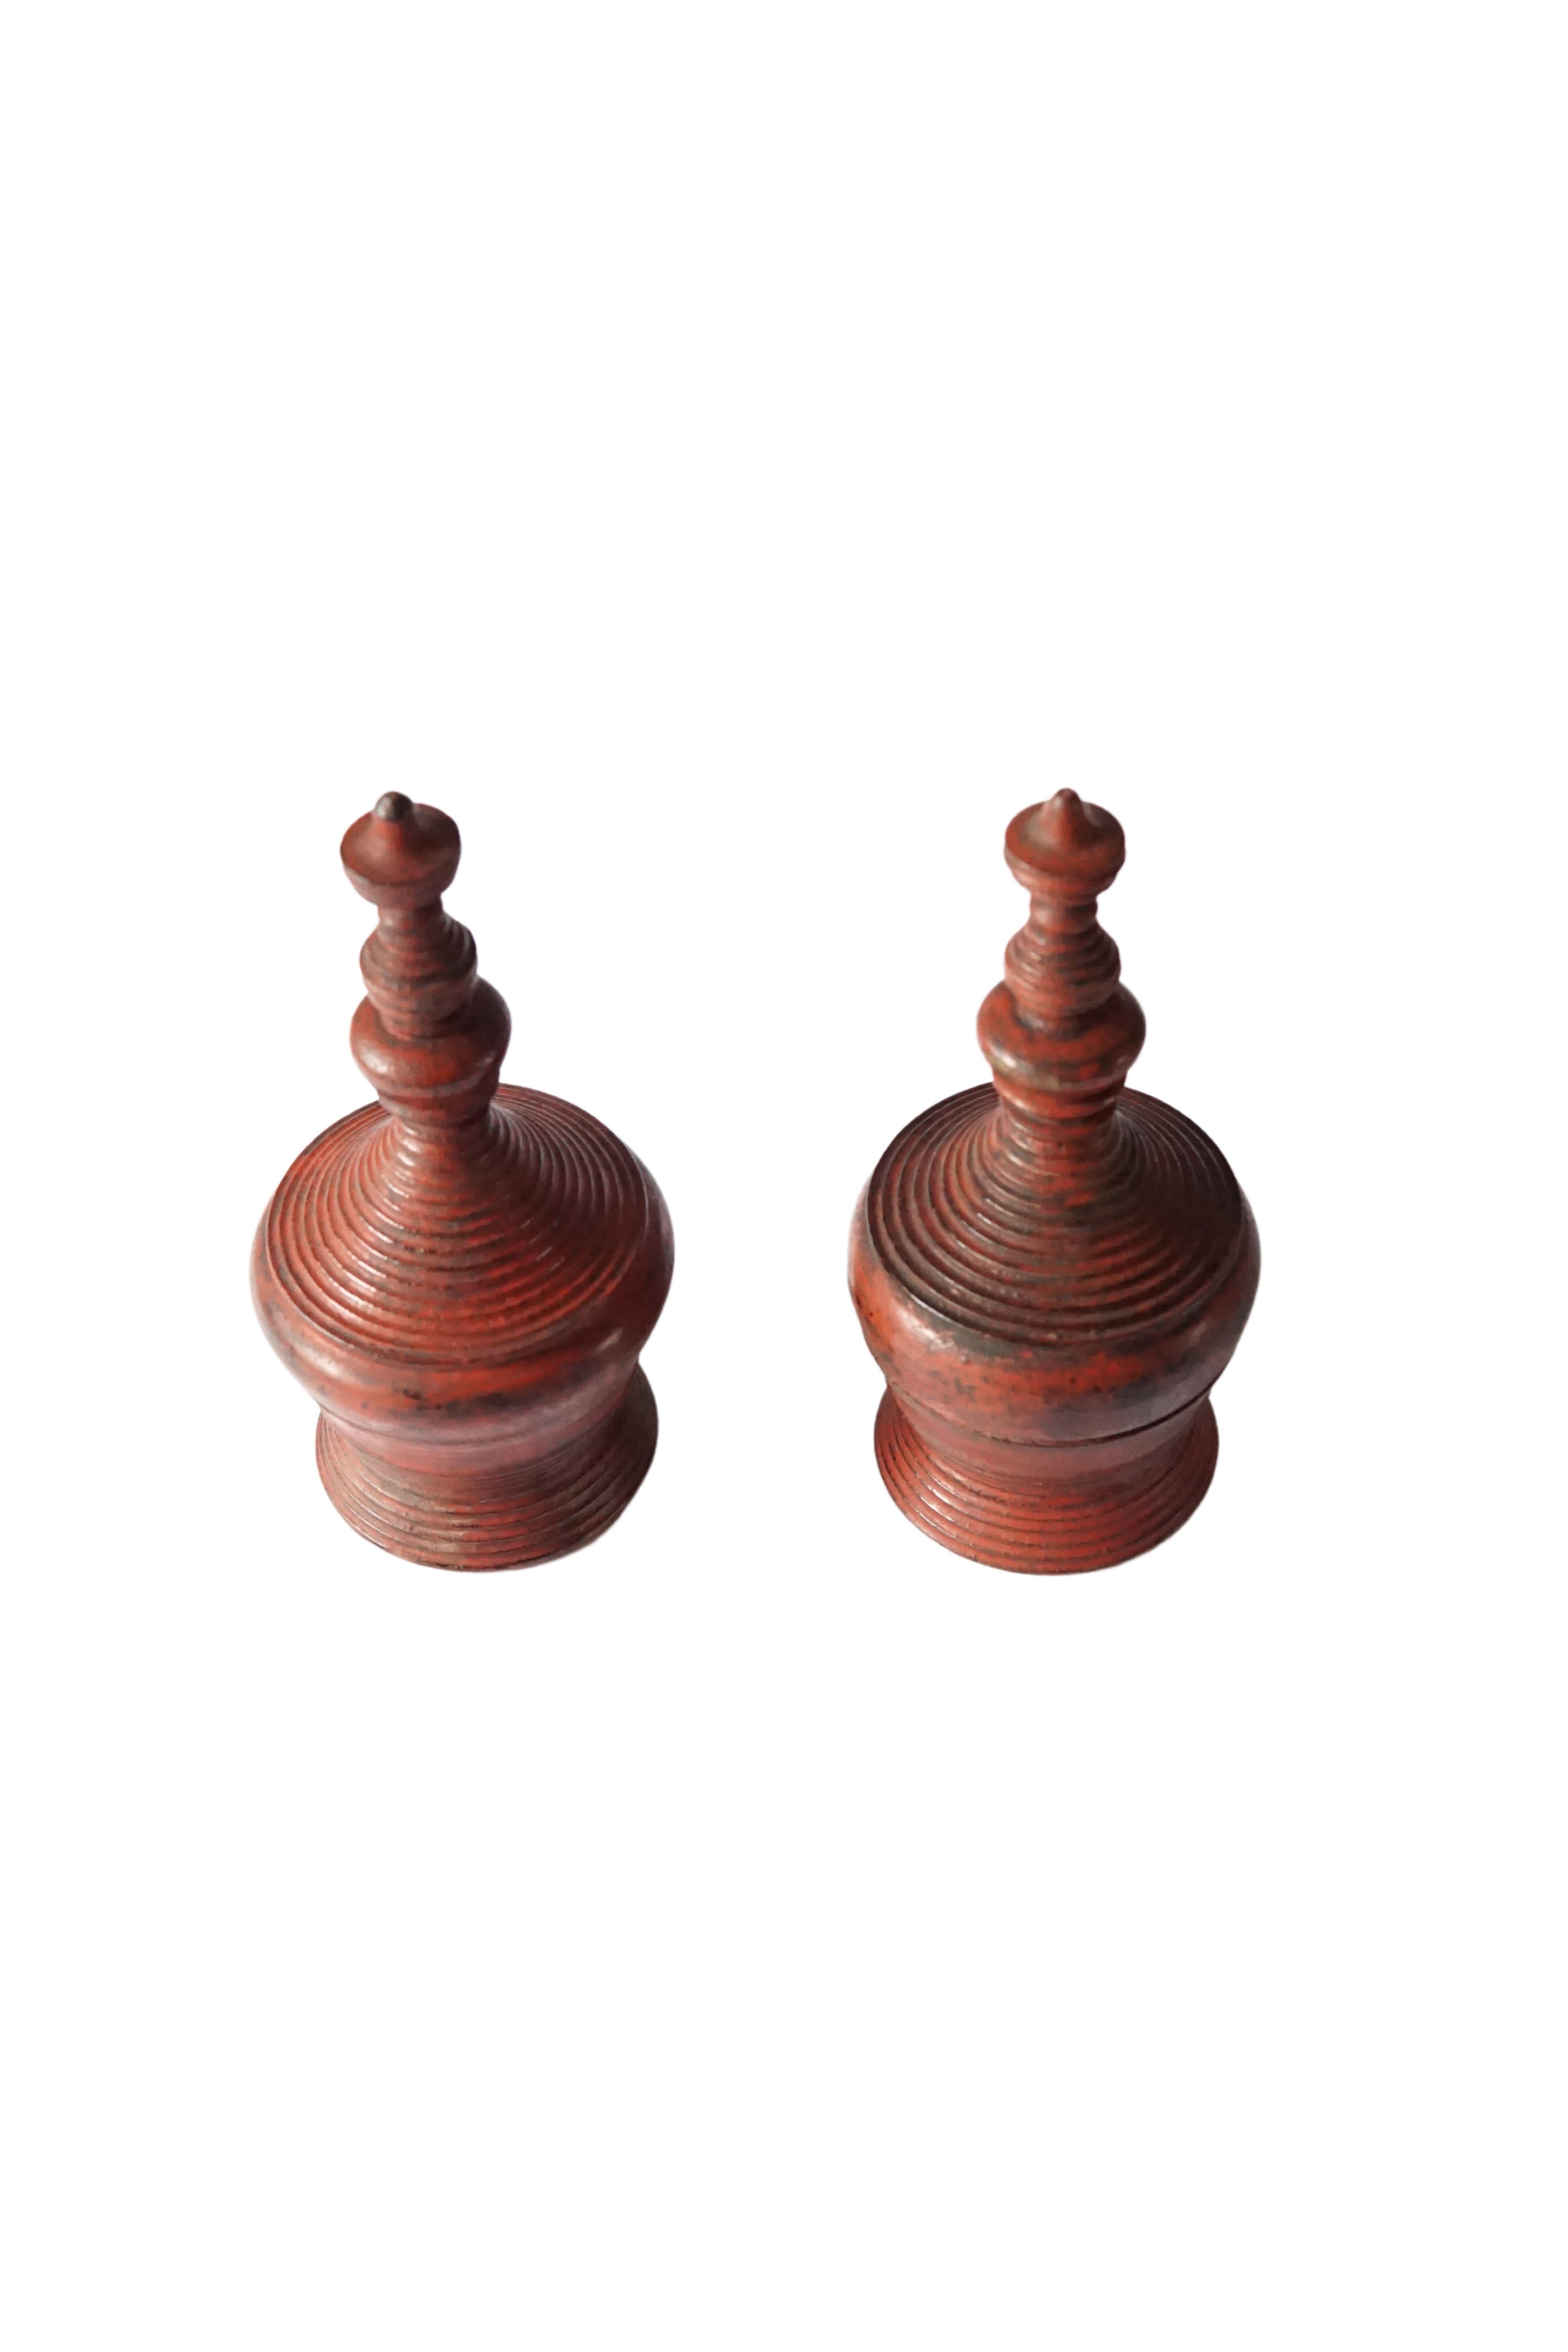 This pair of Small Lacquered Offering Vessels are know in Myanmar as 